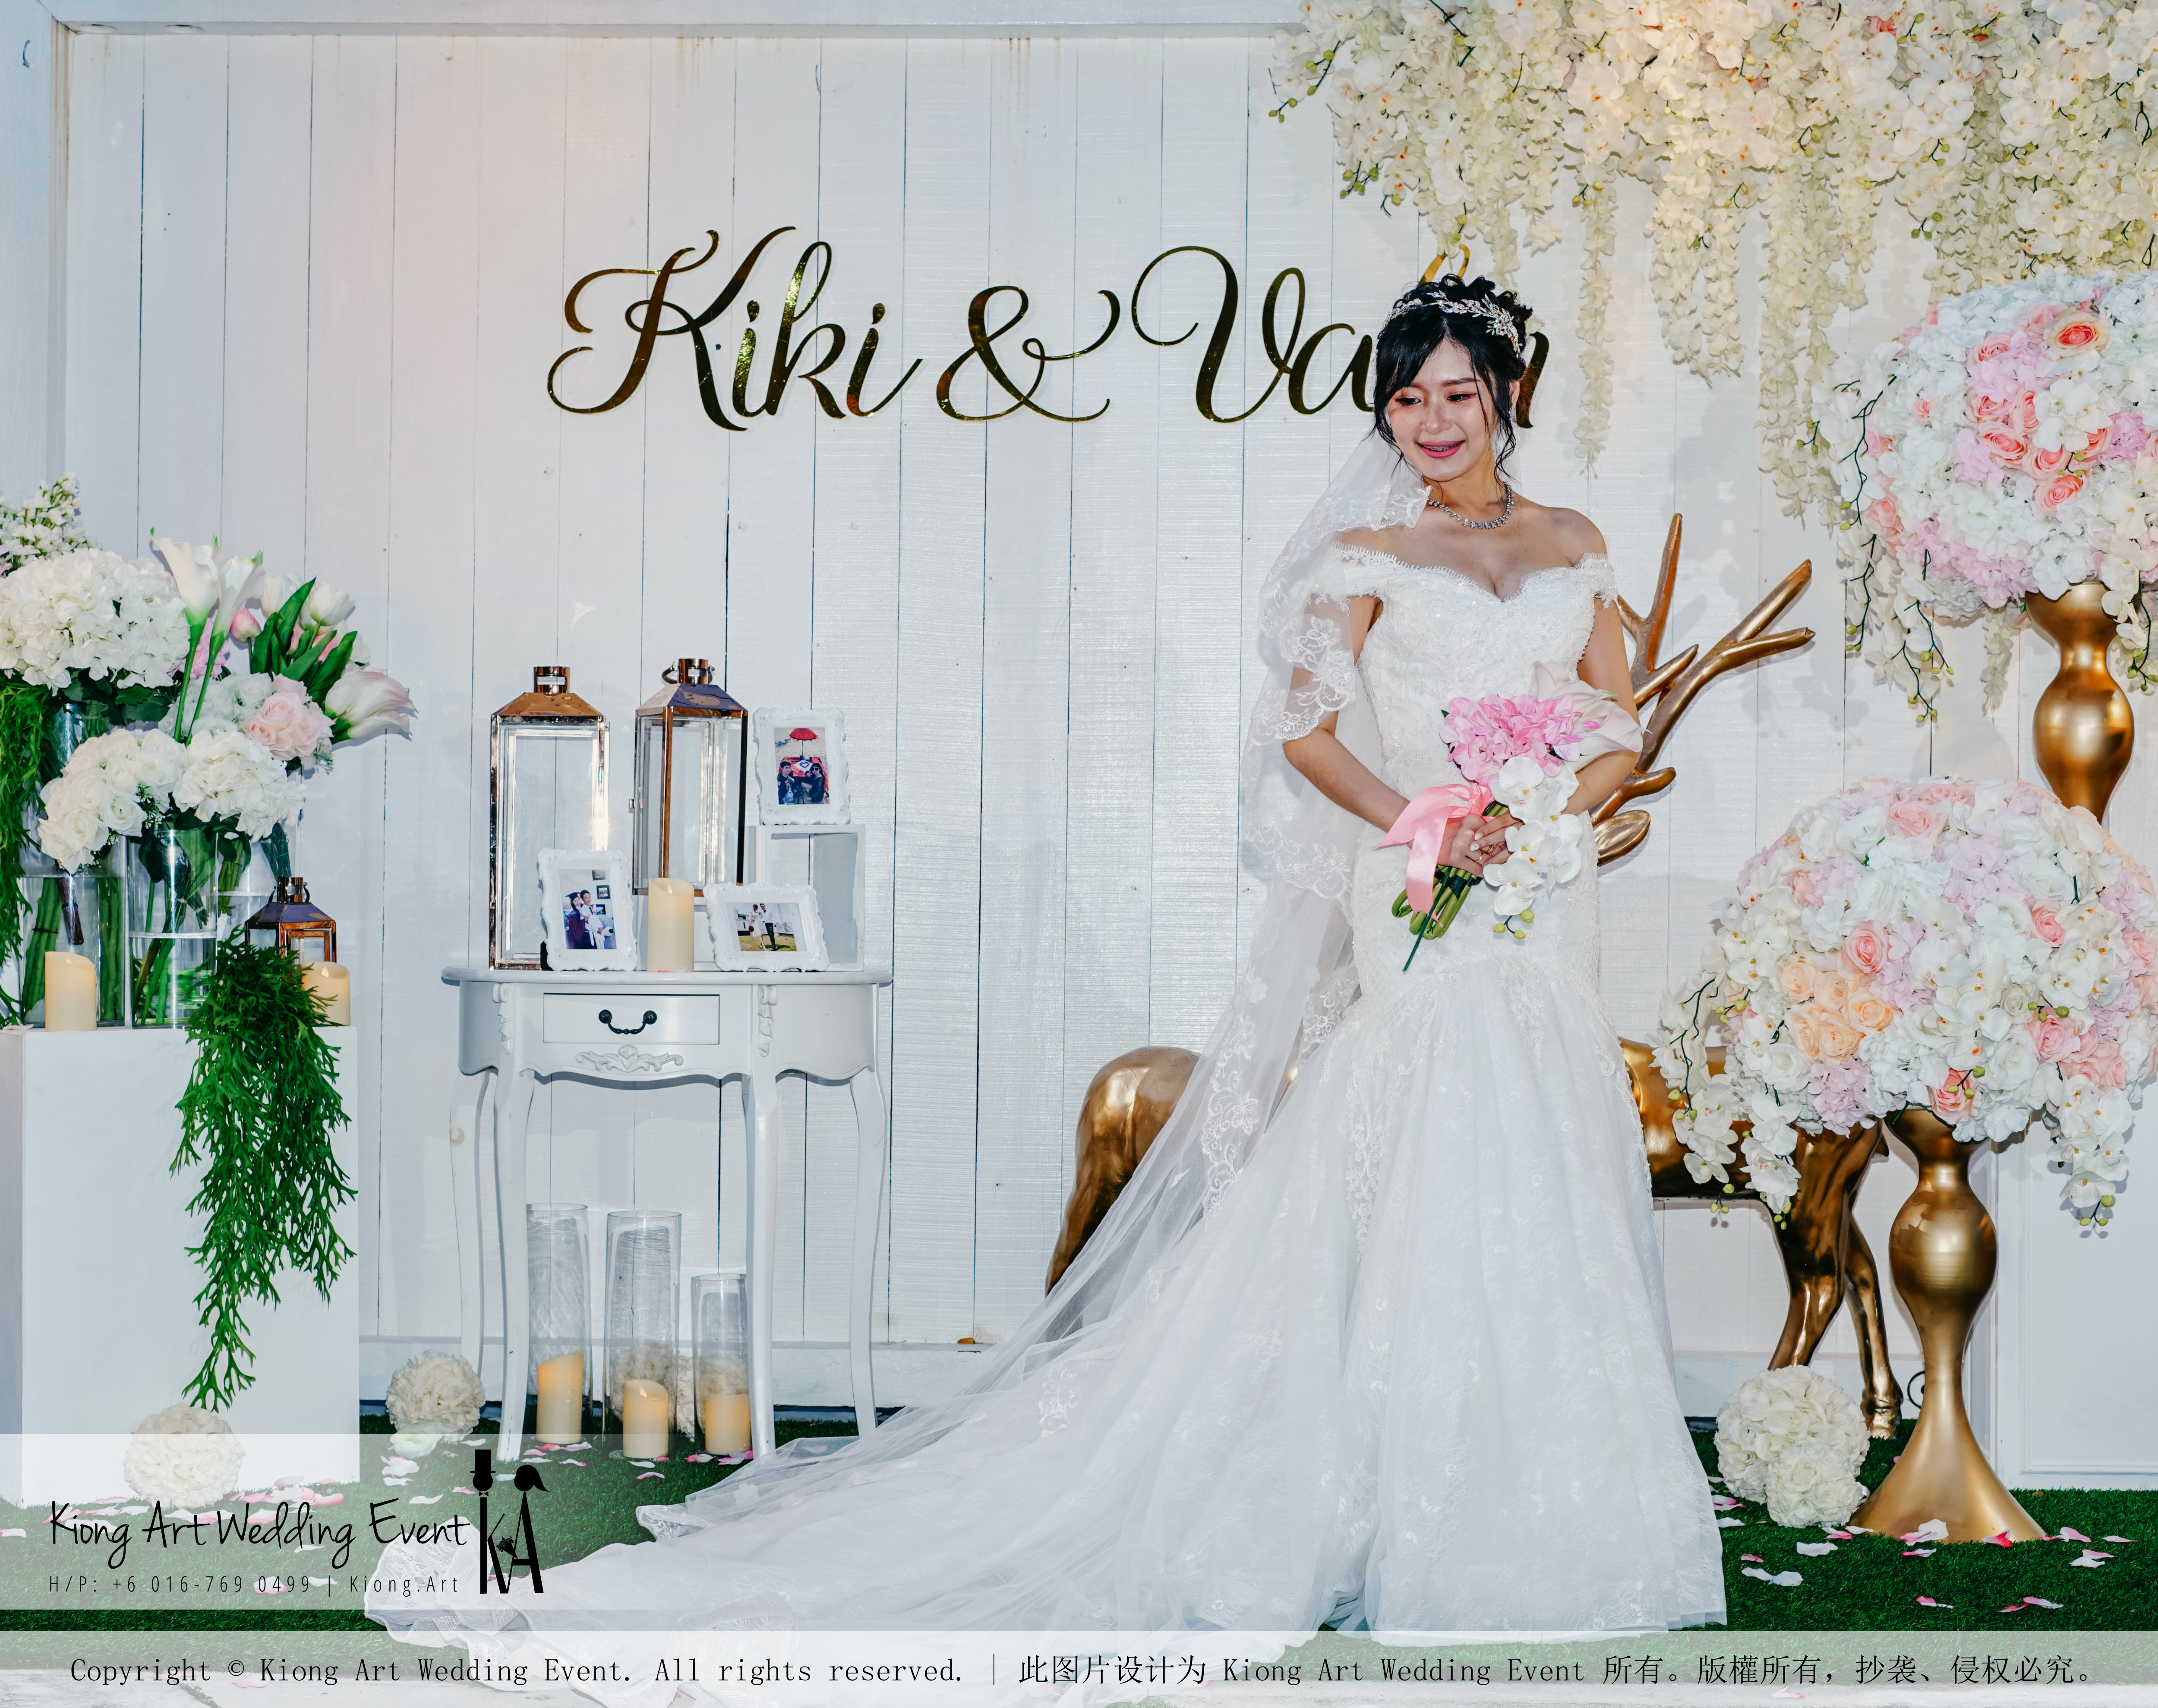 Kiong Art Wedding Event Kuala Lumpur Malaysia Wedding Decoration One-stop Wedding Planning Warm Outdoor Romantic Style Theme Kluang Container Swimming Pool Homestay A07-A01-16